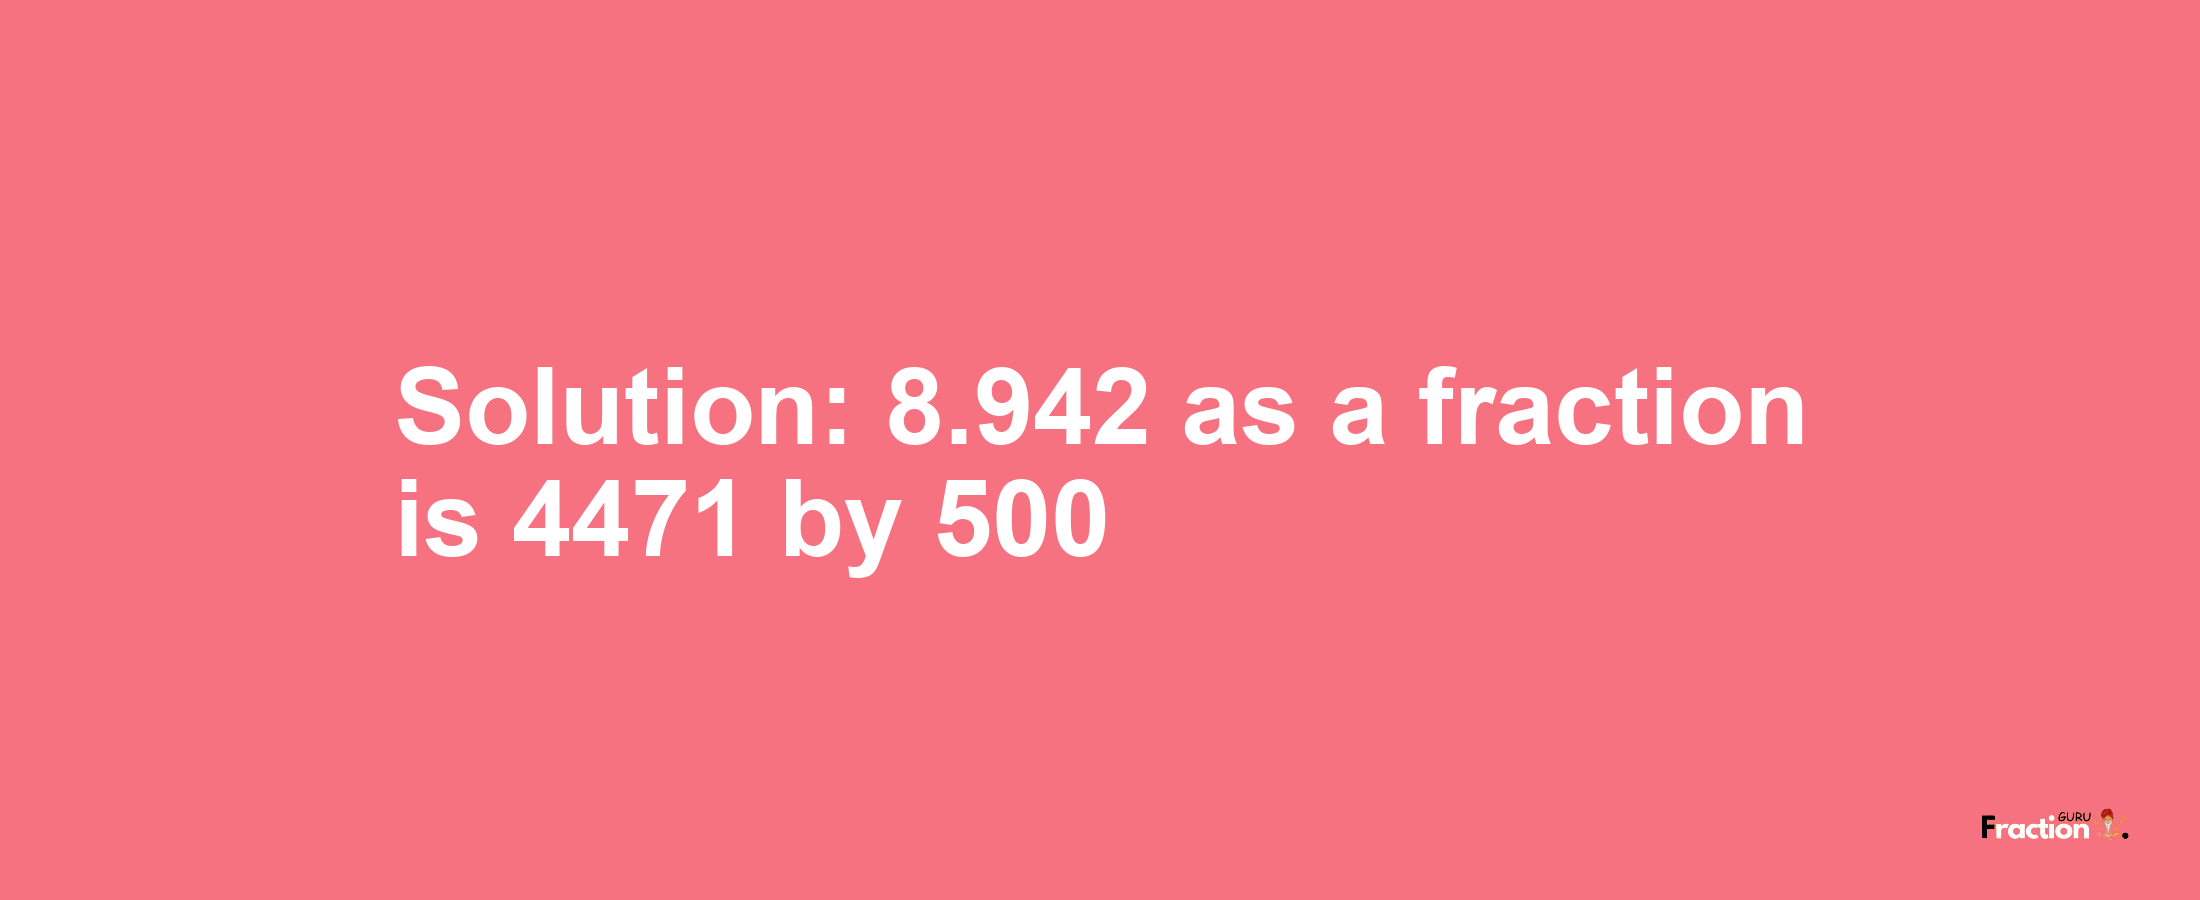 Solution:8.942 as a fraction is 4471/500